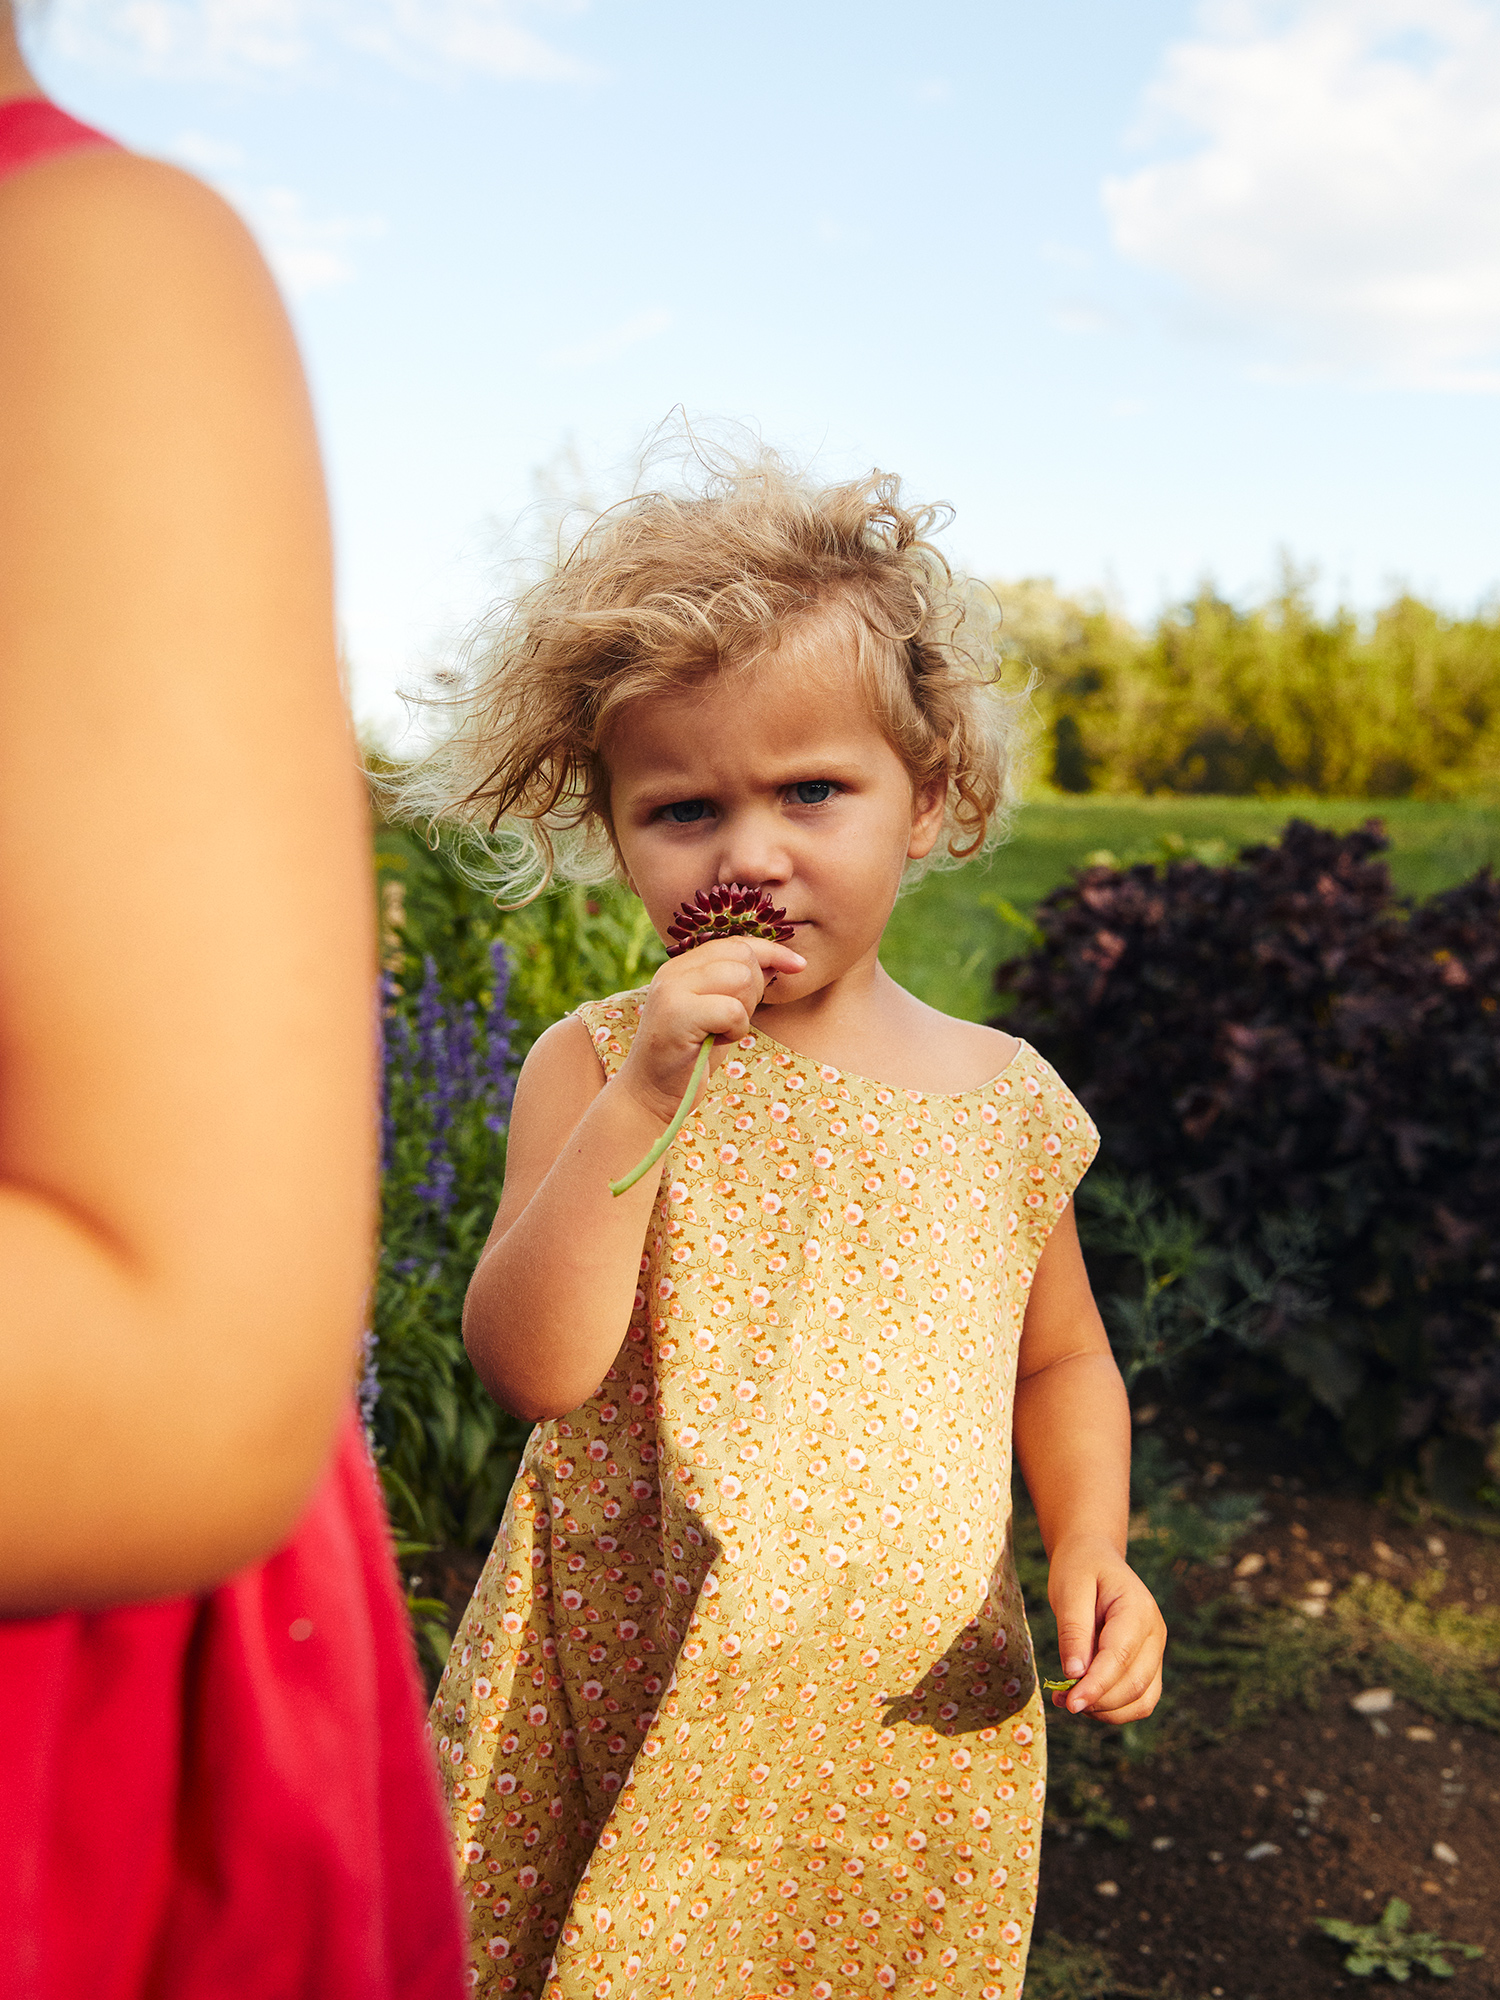 Five year old girl in a yellow flowered dress, sniffing a purple flower